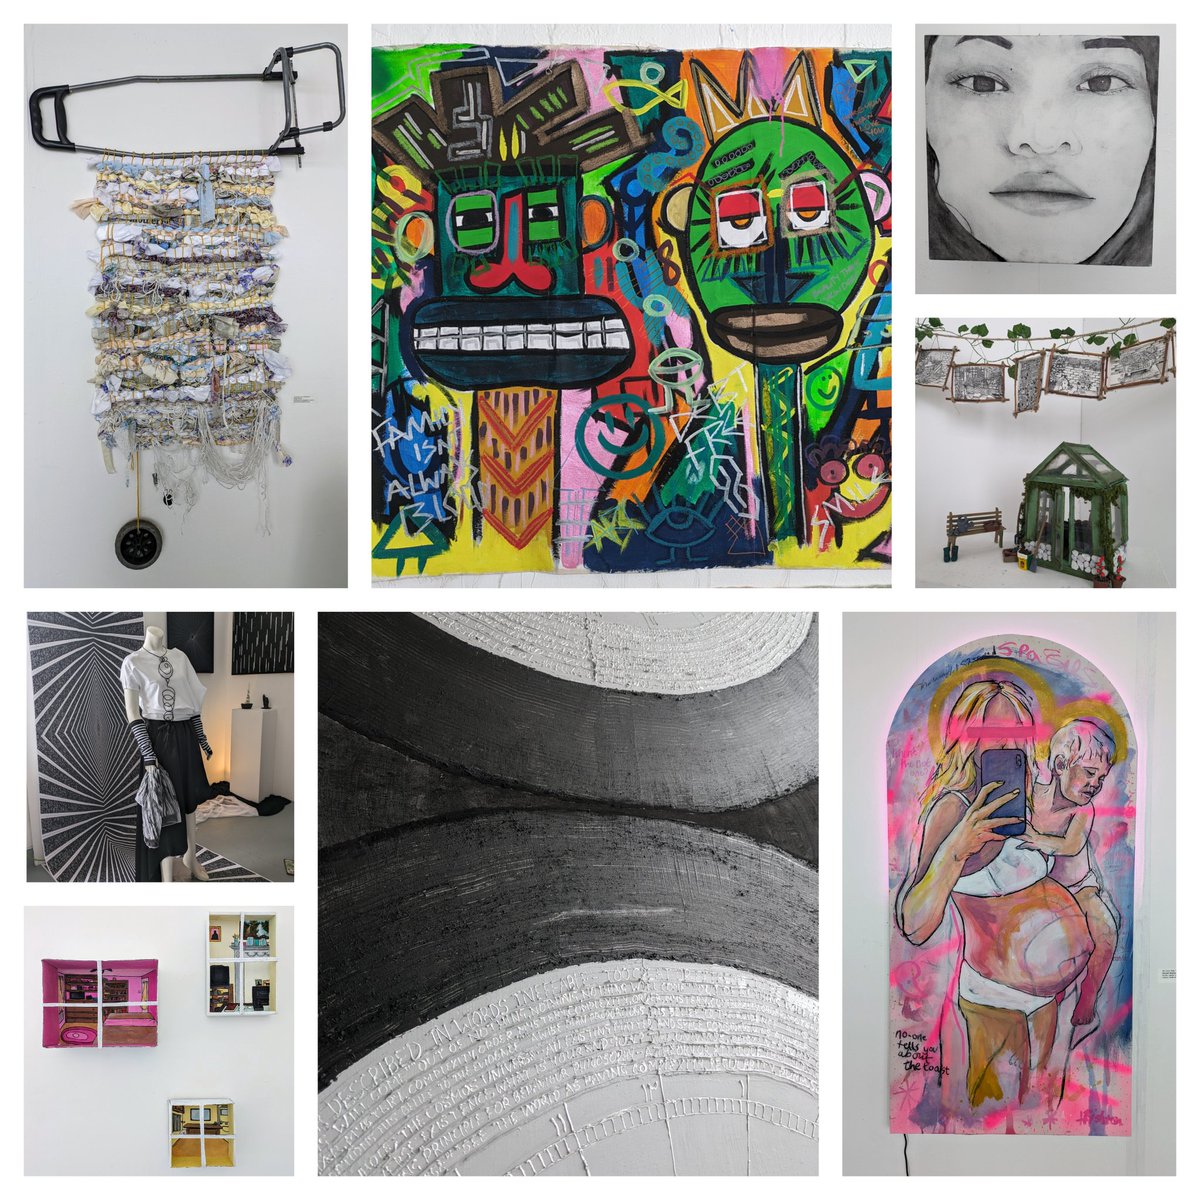 A snippet of the stunning artwork at the level 4 Fine Art exhibition at Wolverhampton School of Art. Great to see such a confident and diverse collection of work from students at the beginning of their degree journey.
#artstudent #fineart #artstudentexhibition  
@wlvsoci @wlv_uni